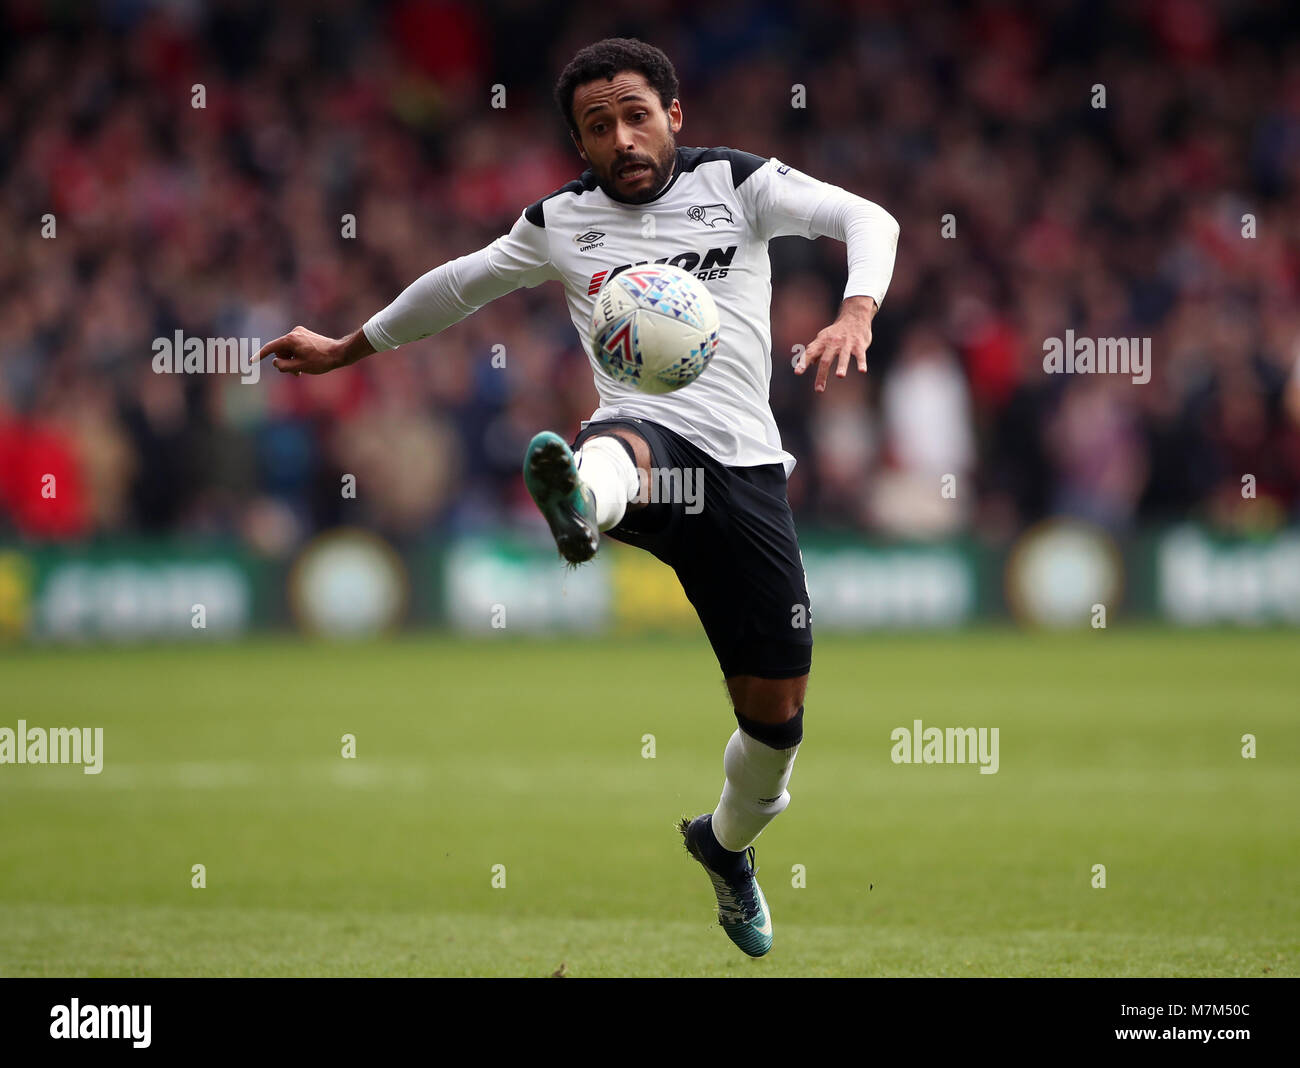 Derby County's Ikechi Anya during the Sky Bet Championship match at the City Ground, Nottingham. PRESS ASSOCIATION Photo. Picture date: Sunday March 11, 2018. See PA story SOCCER Forest. Photo credit should read: Nick Potts/PA Wire. RESTRICTIONS: No use with unauthorised audio, video, data, fixture lists, club/league logos or 'live' services. Online in-match use limited to 75 images, no video emulation. No use in betting, games or single club/league/player publications. Stock Photo